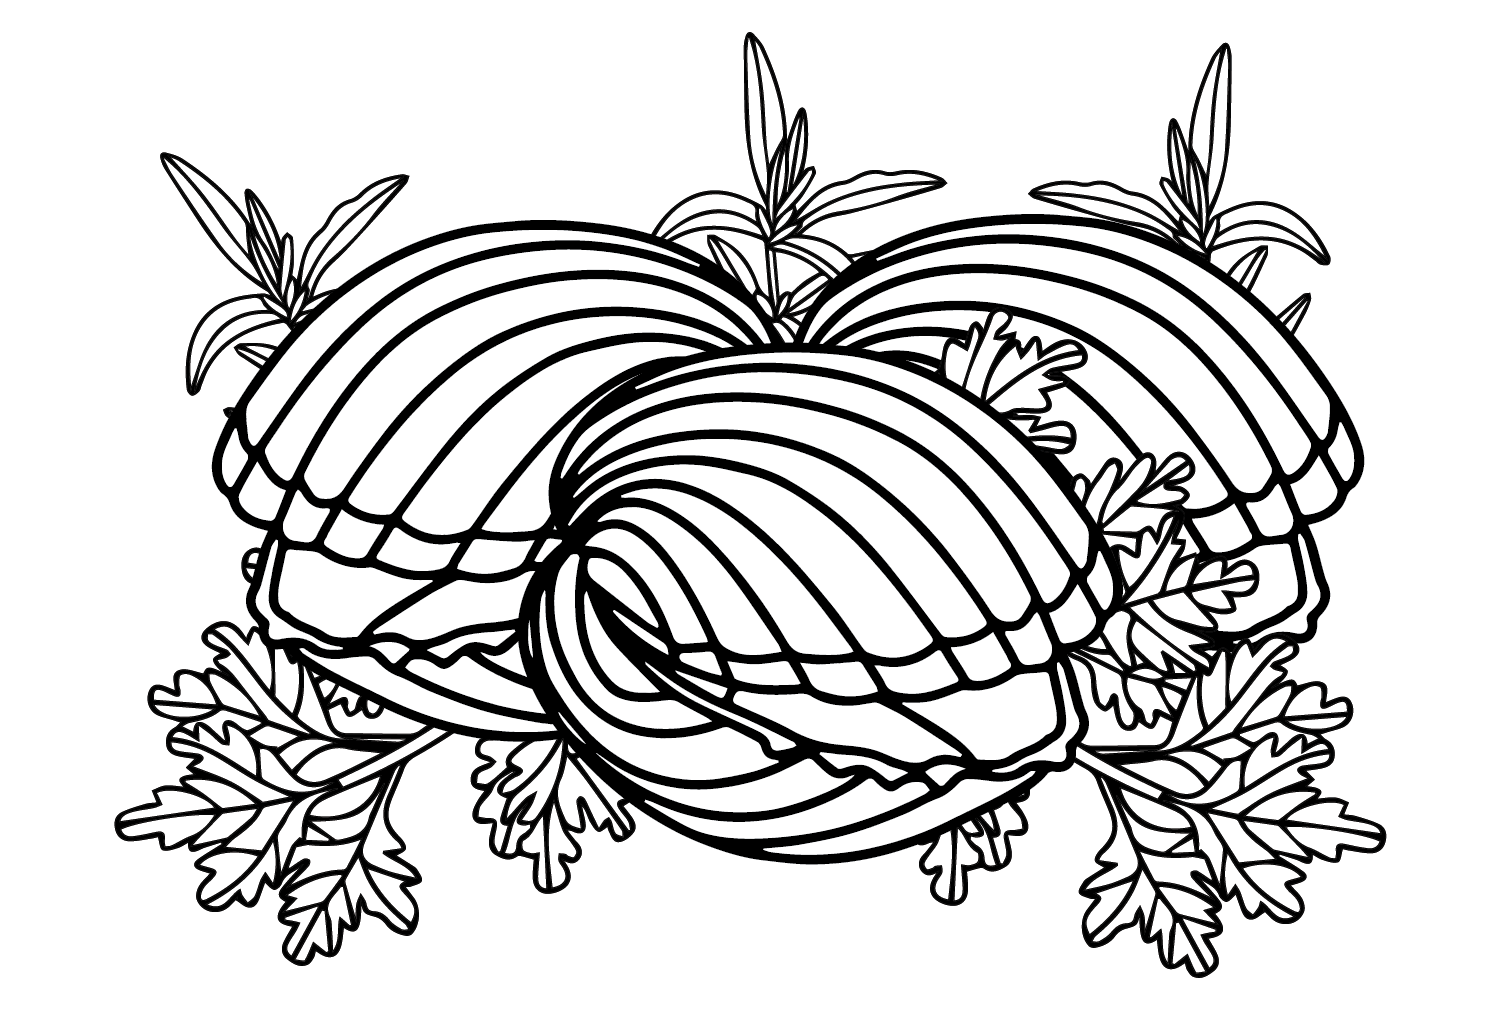 Cockle and Herbs Coloring Pages